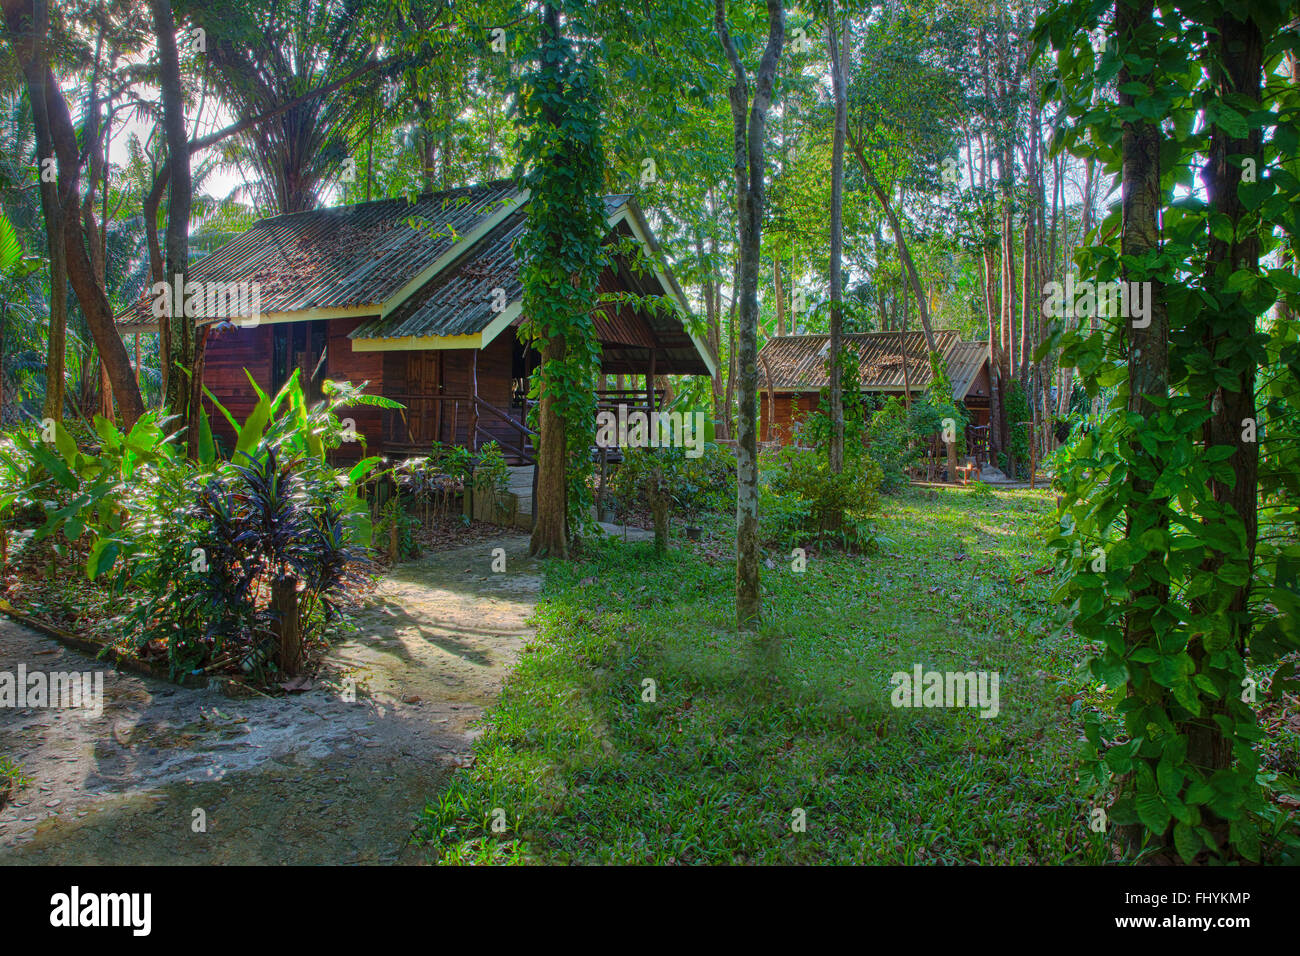 The RIVERSIDE COTTAGES in KHO SOK are a perfect place to stay to visit Kho Sok National Park - THAILAND Stock Photo